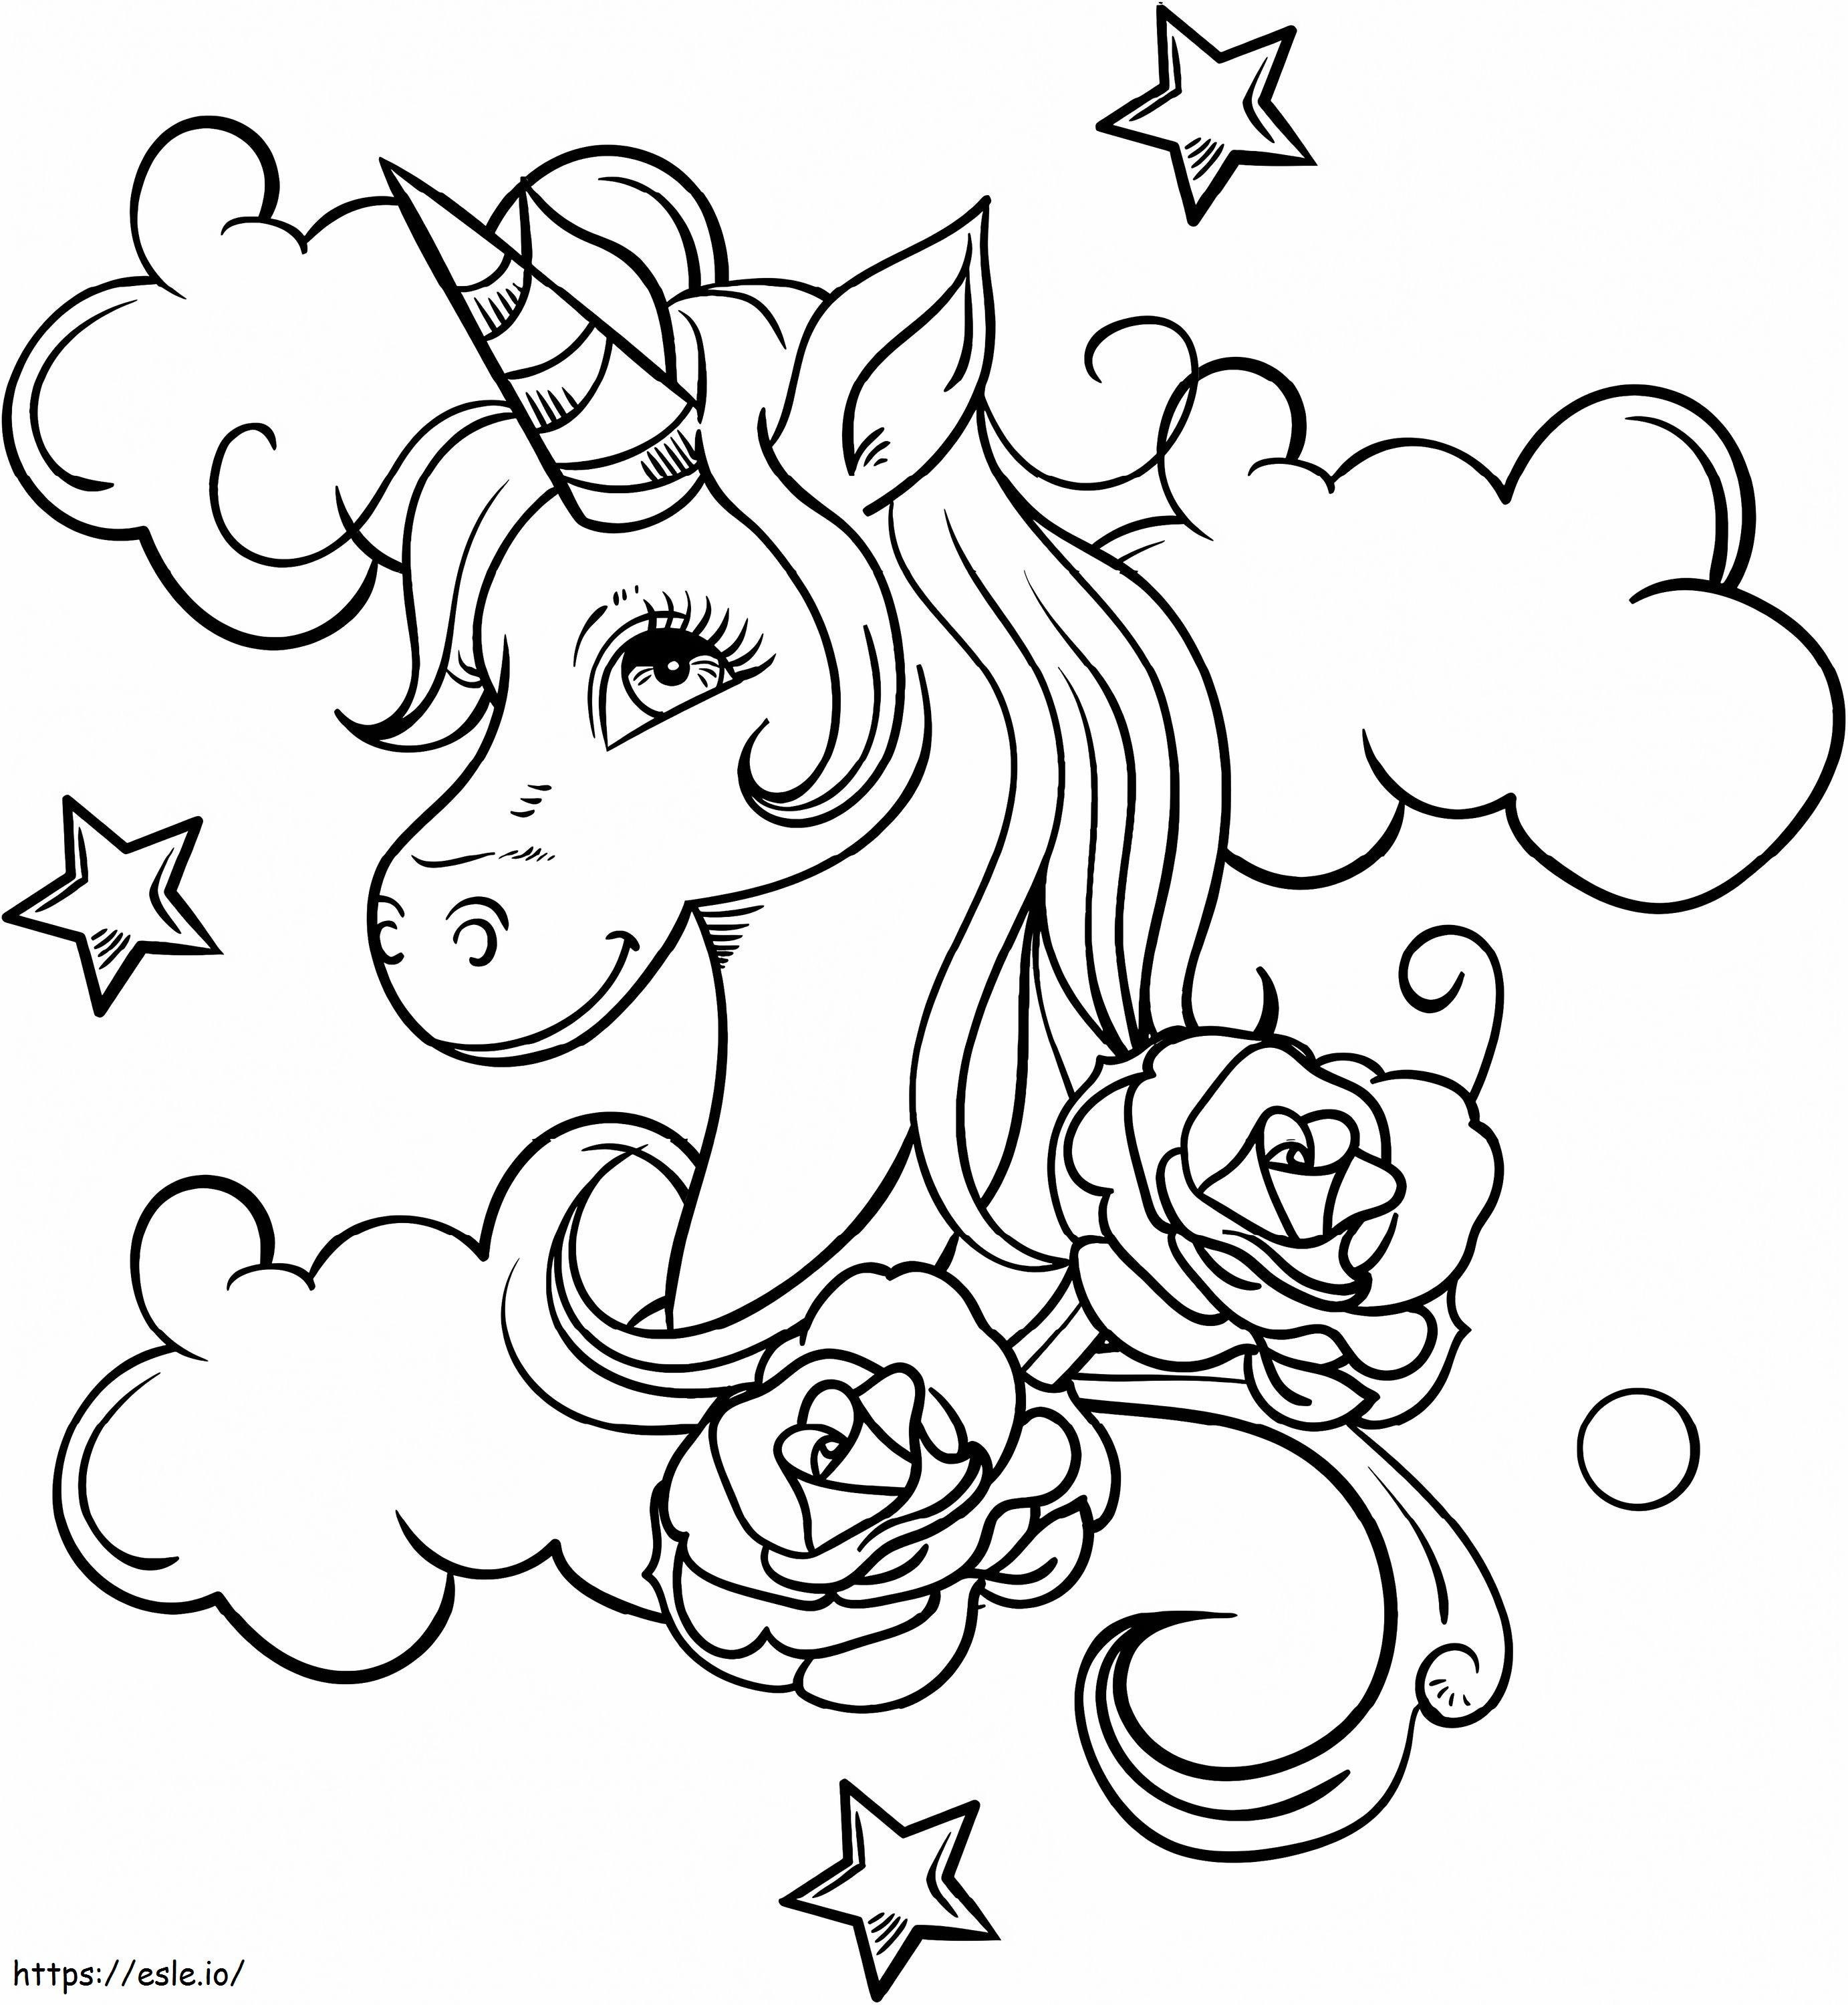 1564363002 Roses N Unicorn Head A4 coloring page